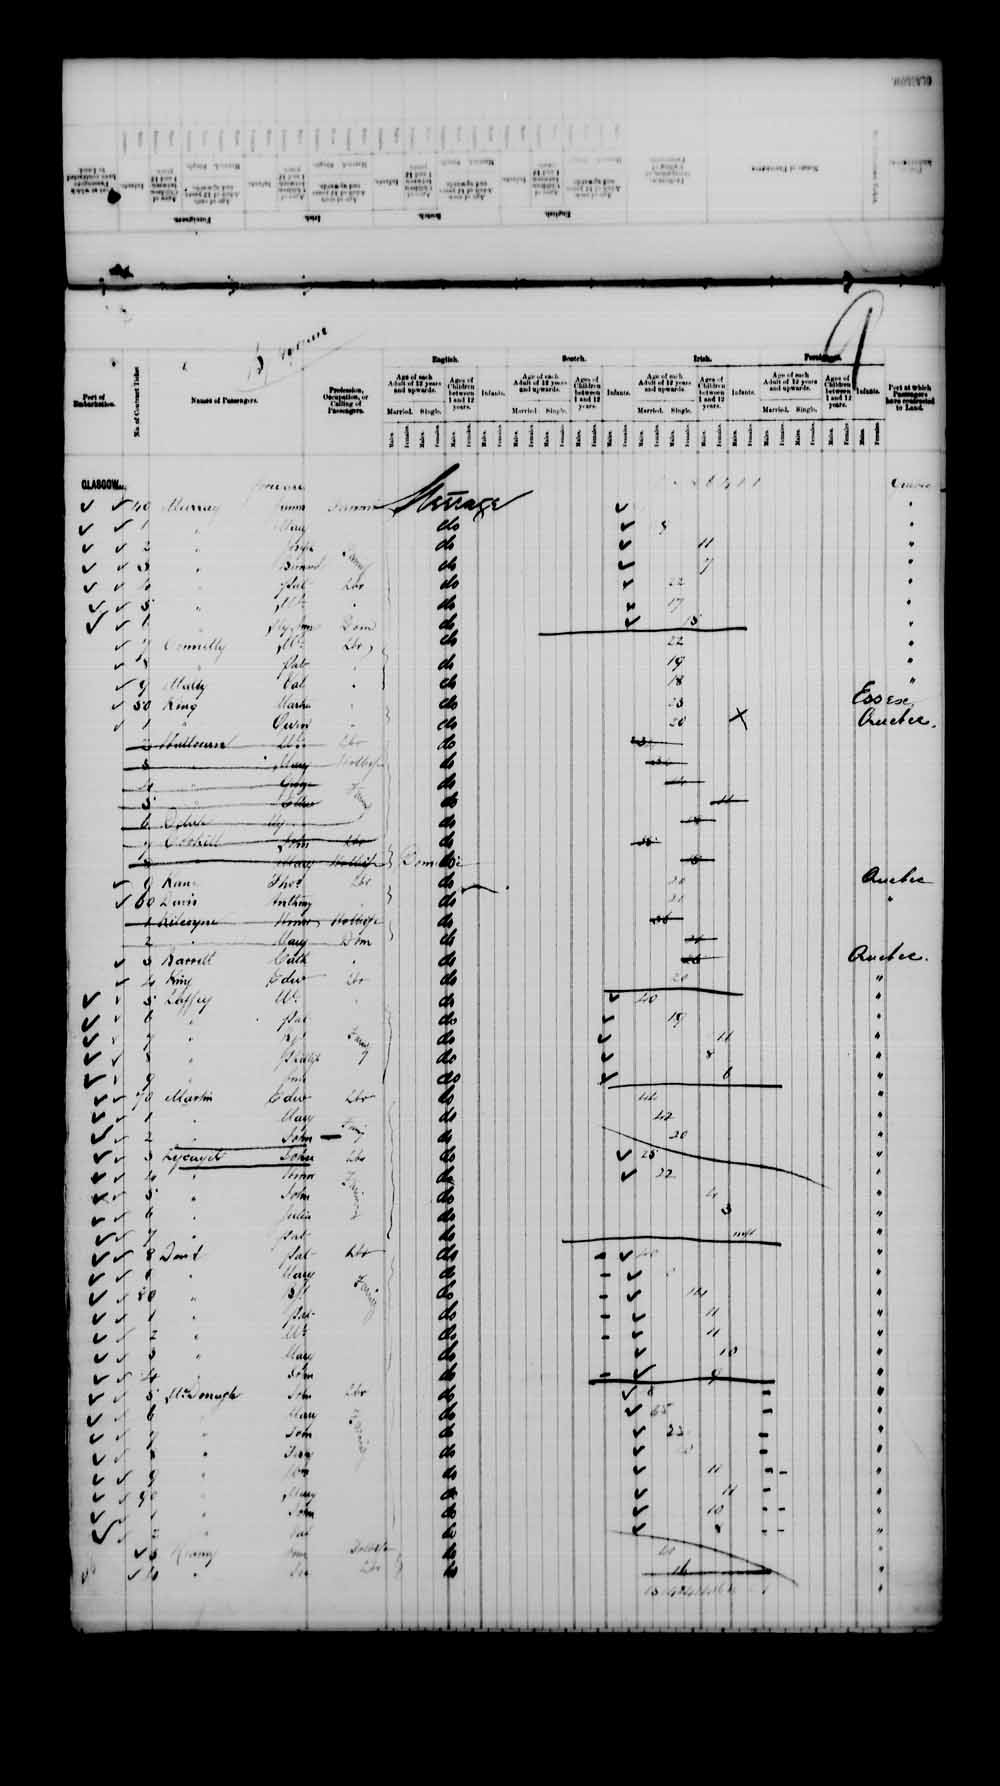 Digitized page of Passenger Lists for Image No.: e003542784